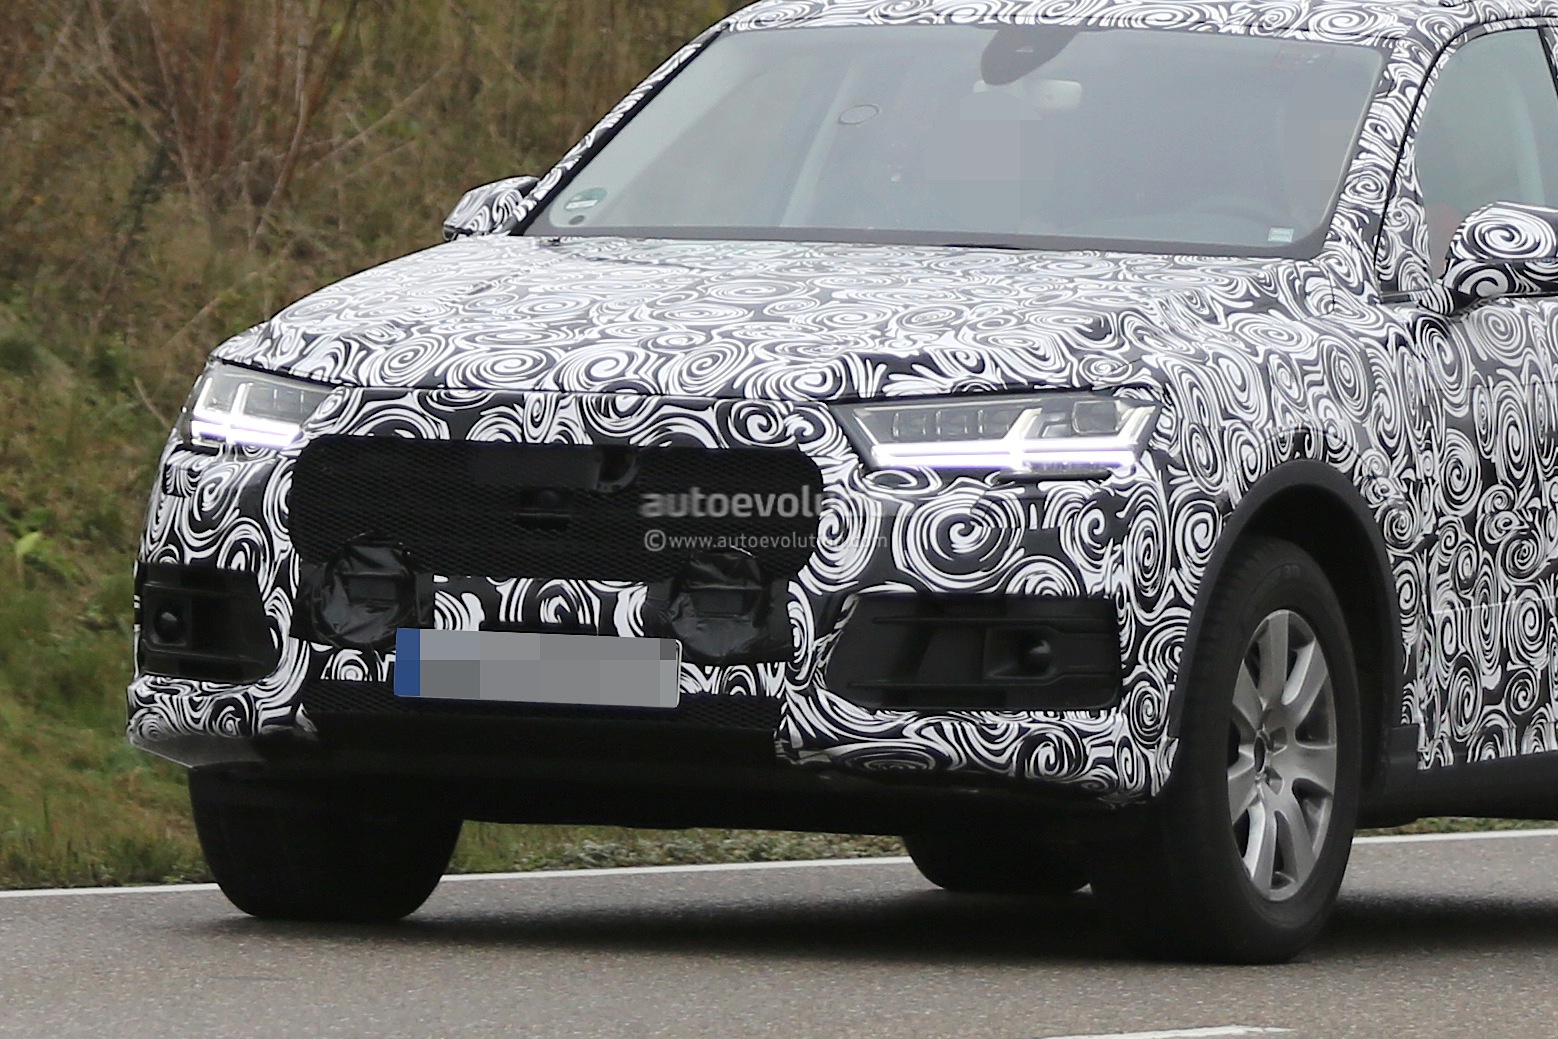 2016-audi-q7-spied-with-matrix-led-headlights-for-first-time_9